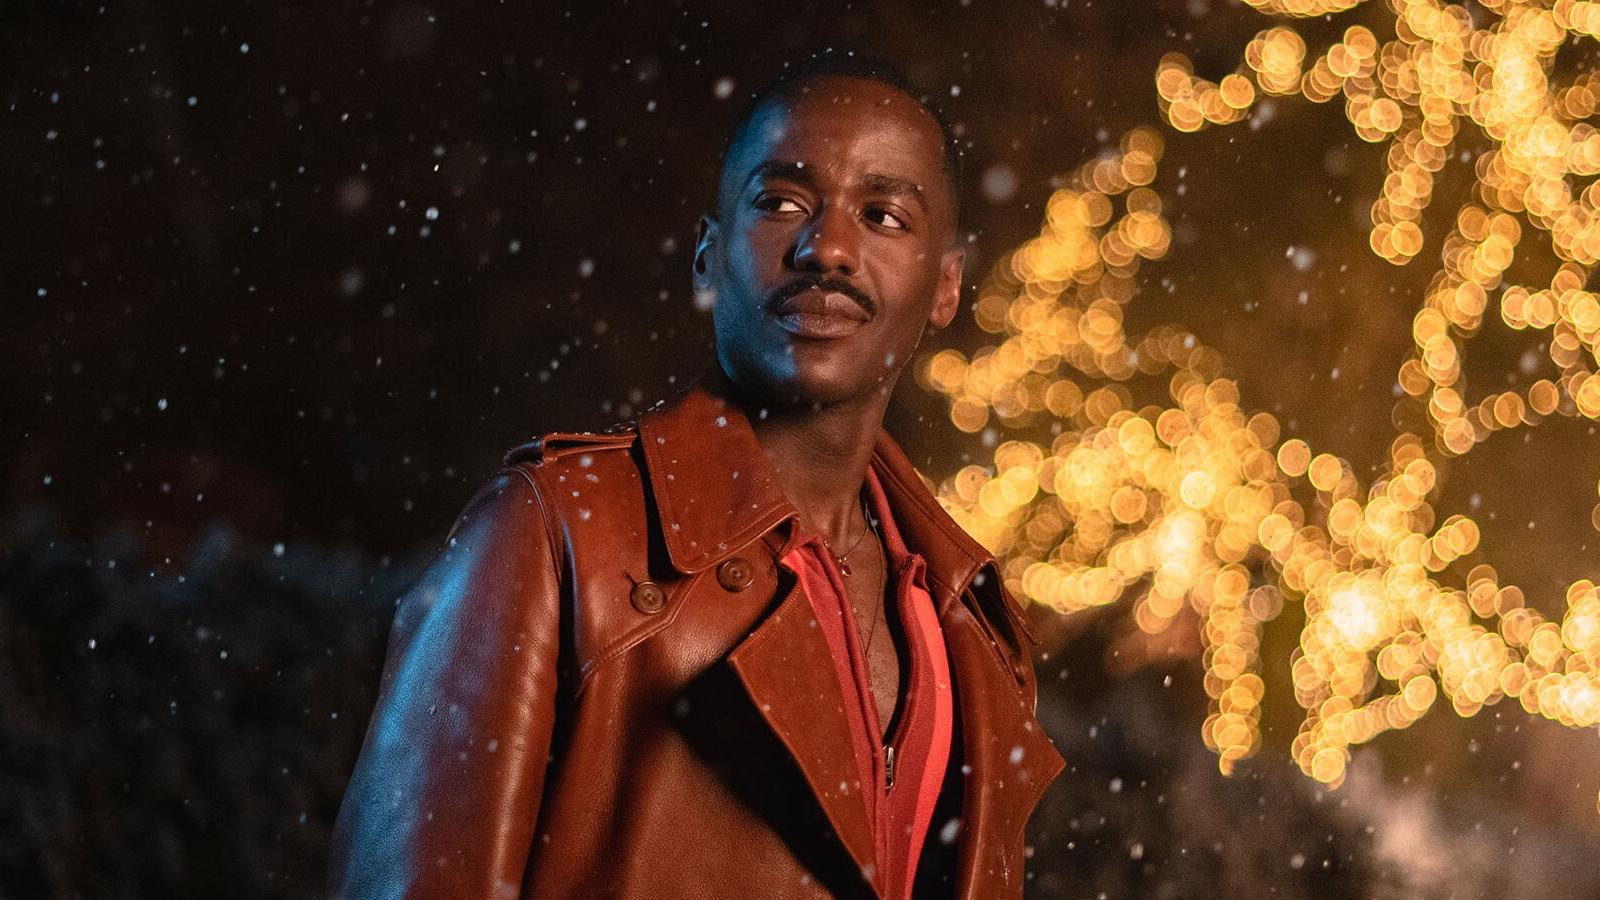 Ncuti Gatwa as the Fifteenth Doctor in the Doctor Who Christmas special